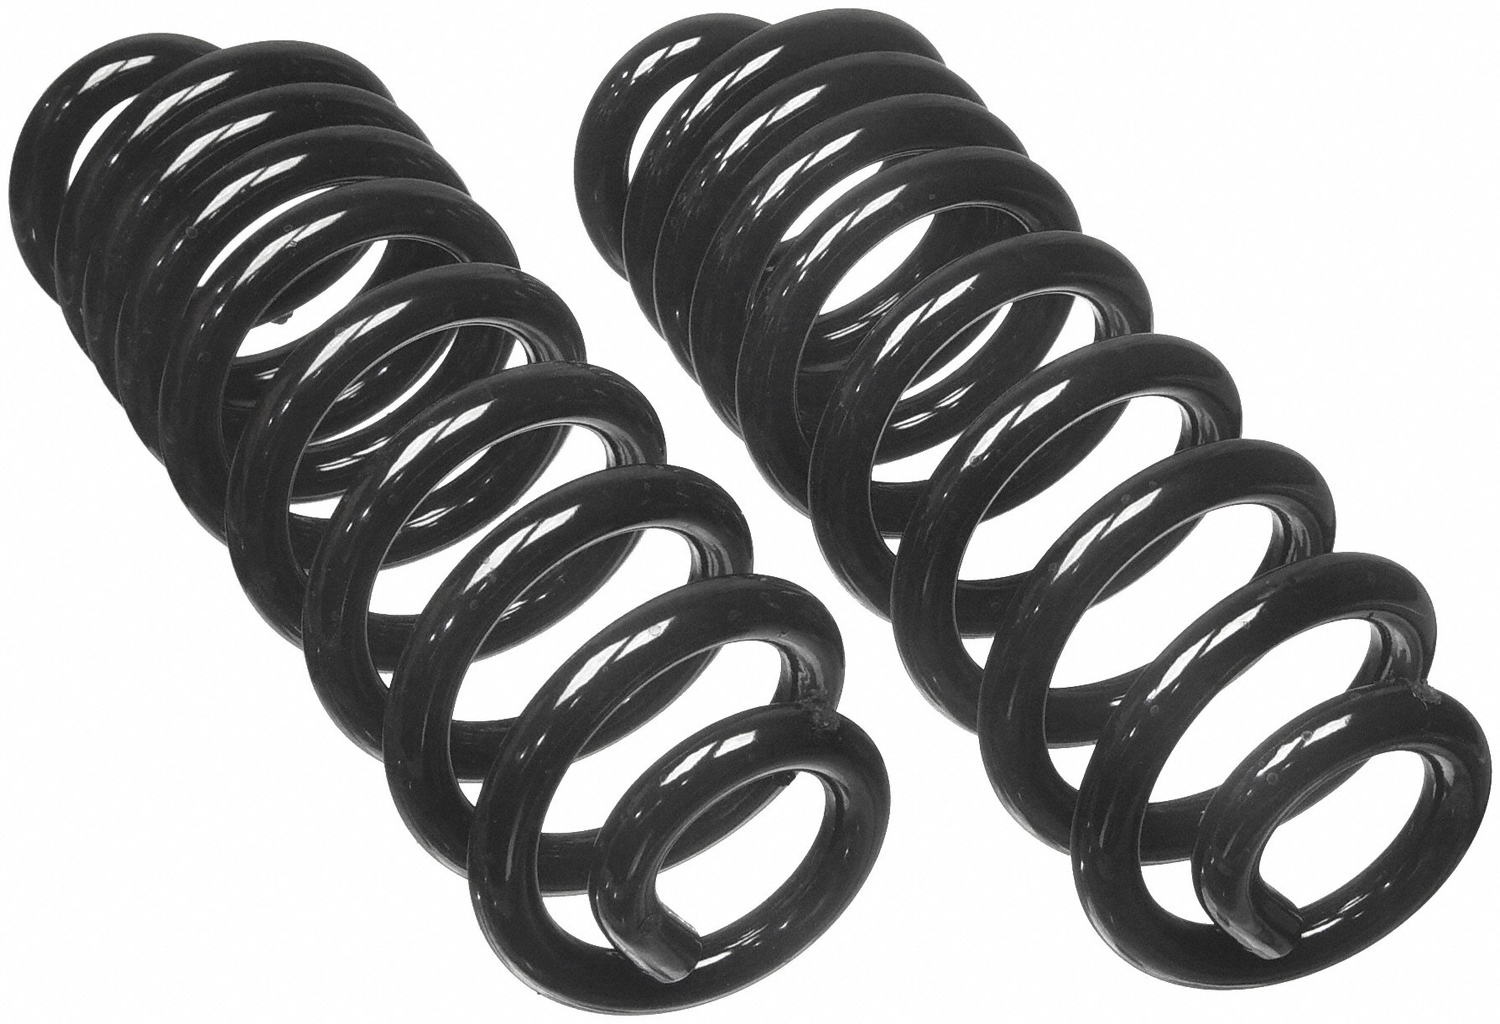 Image of ID CC611 Moog CC611 Coil Spring Set Fits 1987-1992 Cadillac Brougham